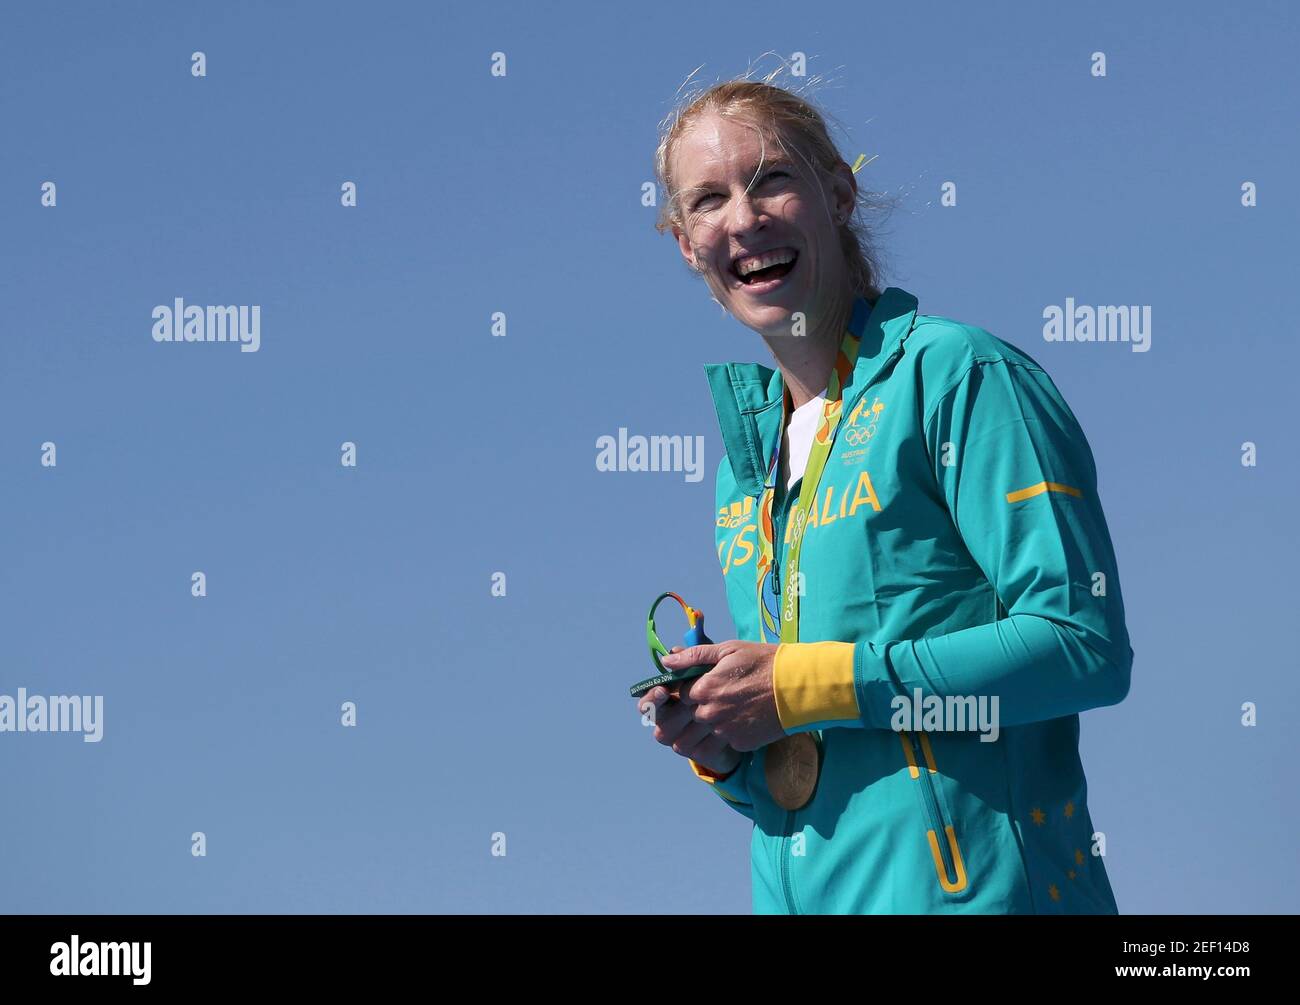 2016 Rio Olympics - Rowing - Victory Ceremony - Women's Single Sculls Victory Ceremony - Lagoa Stadium - Rio De Janeiro, Brazil - 13/08/2016. Kim Brennan (AUS) of Australia poses with her medal. REUTERS/PHOTOG NAME FOR EDITORIAL USE ONLY. NOT FOR SALE FOR MARKETING OR ADVERTISING CAMPAIGNS.   Picture Supplied by Action Images Stock Photo